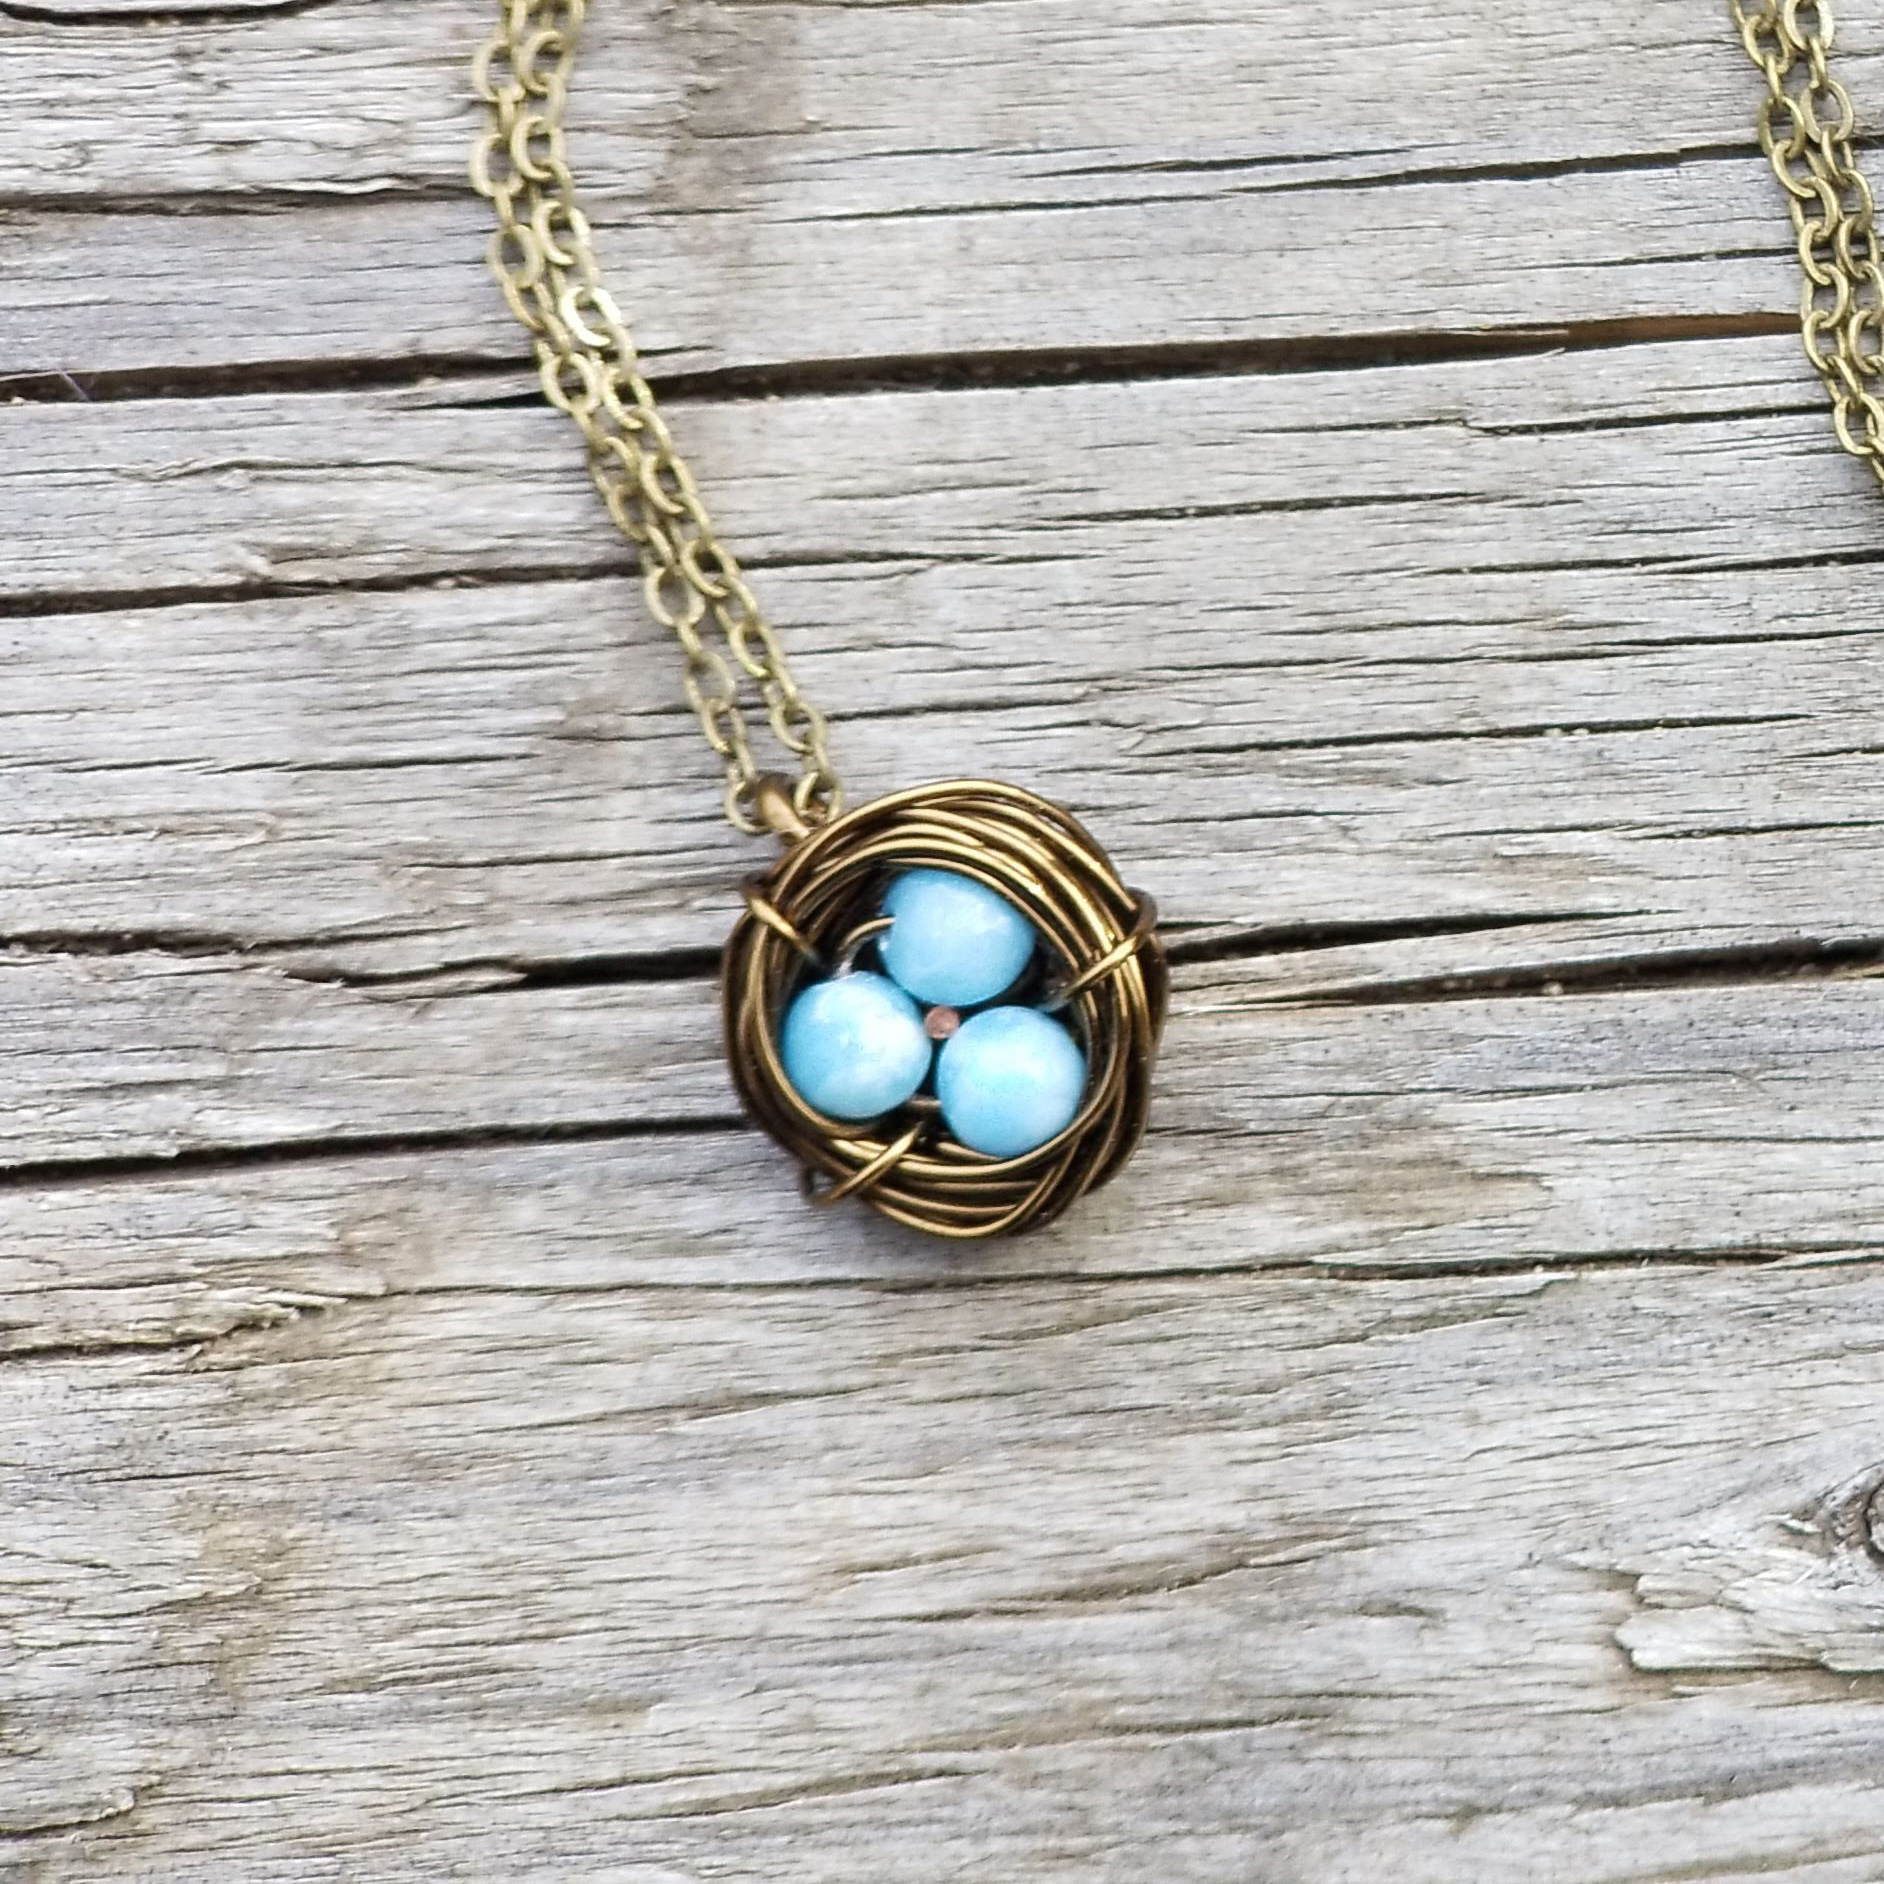 pendant with brass finish in shape of a bird's nest with three blue beads inside resembling robin's eggs 